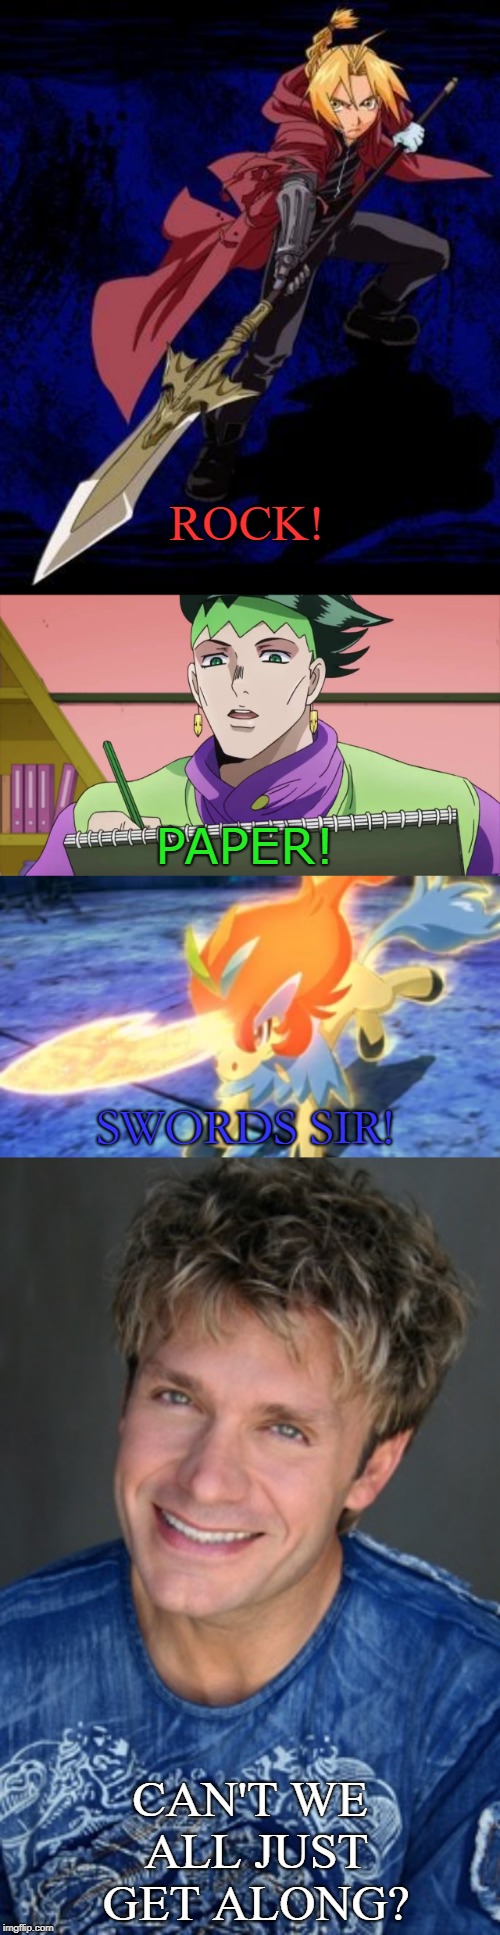  ROCK! PAPER! SWORDS SIR! CAN'T WE ALL JUST GET ALONG? | image tagged in vic mignogna,fullmetal alchemist,pokemon,jojo's bizarre adventure,voices,anime | made w/ Imgflip meme maker